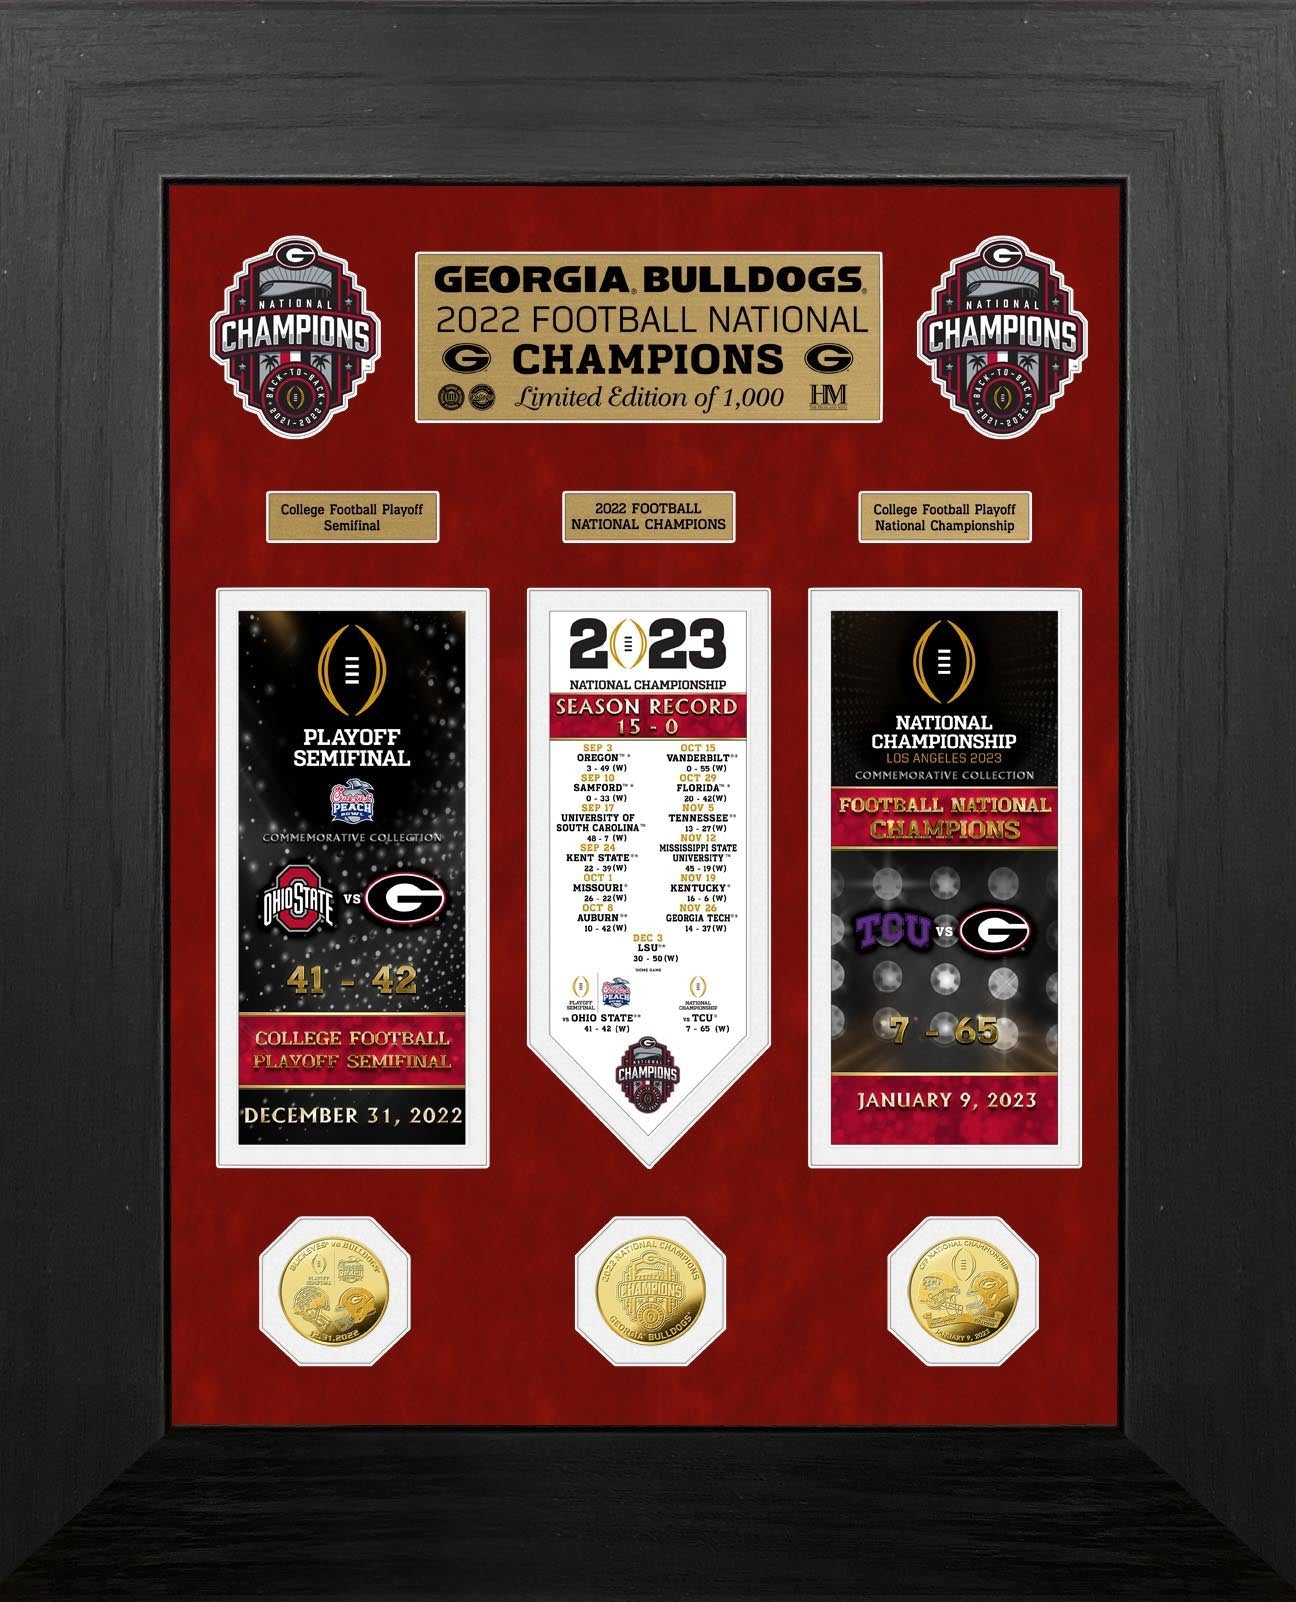 Georgia Bulldogs 2022 Road to the Championship Deluxe Ticket & Gold Coin Photo Mint